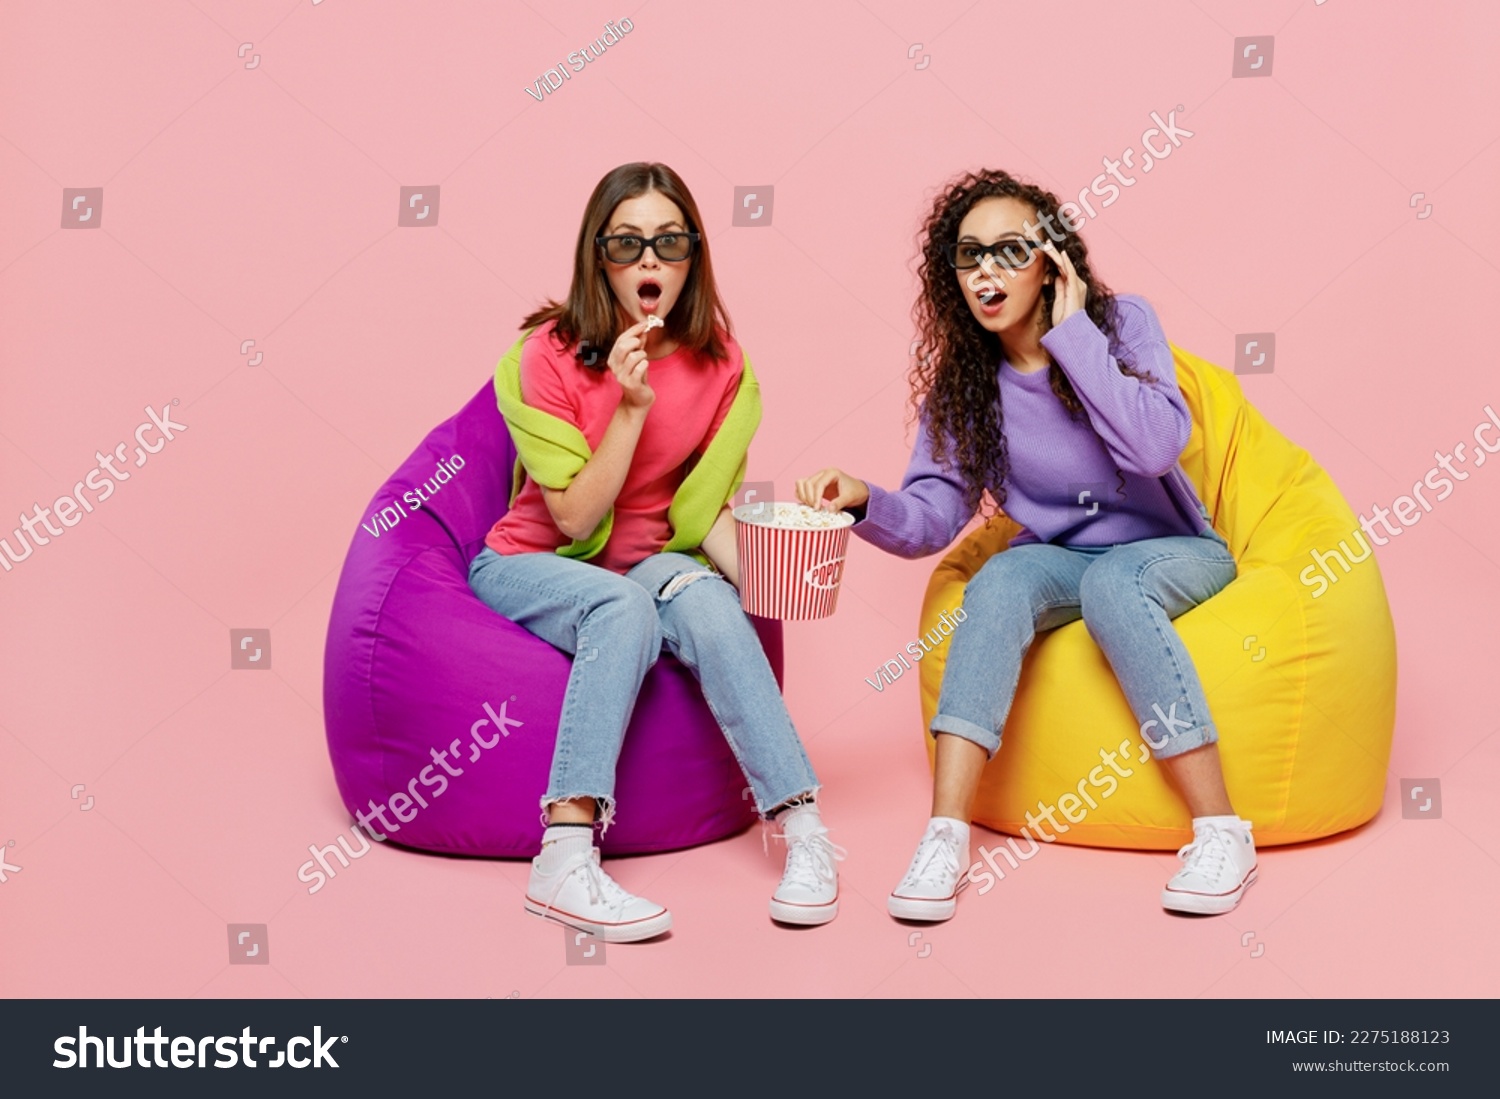 Full size young two friends shocked surprised amazed astonished women in 3d glasses watching movie film in cinema sit in bag chair isolated on pastel plain light pink color background studio portrait #2275188123